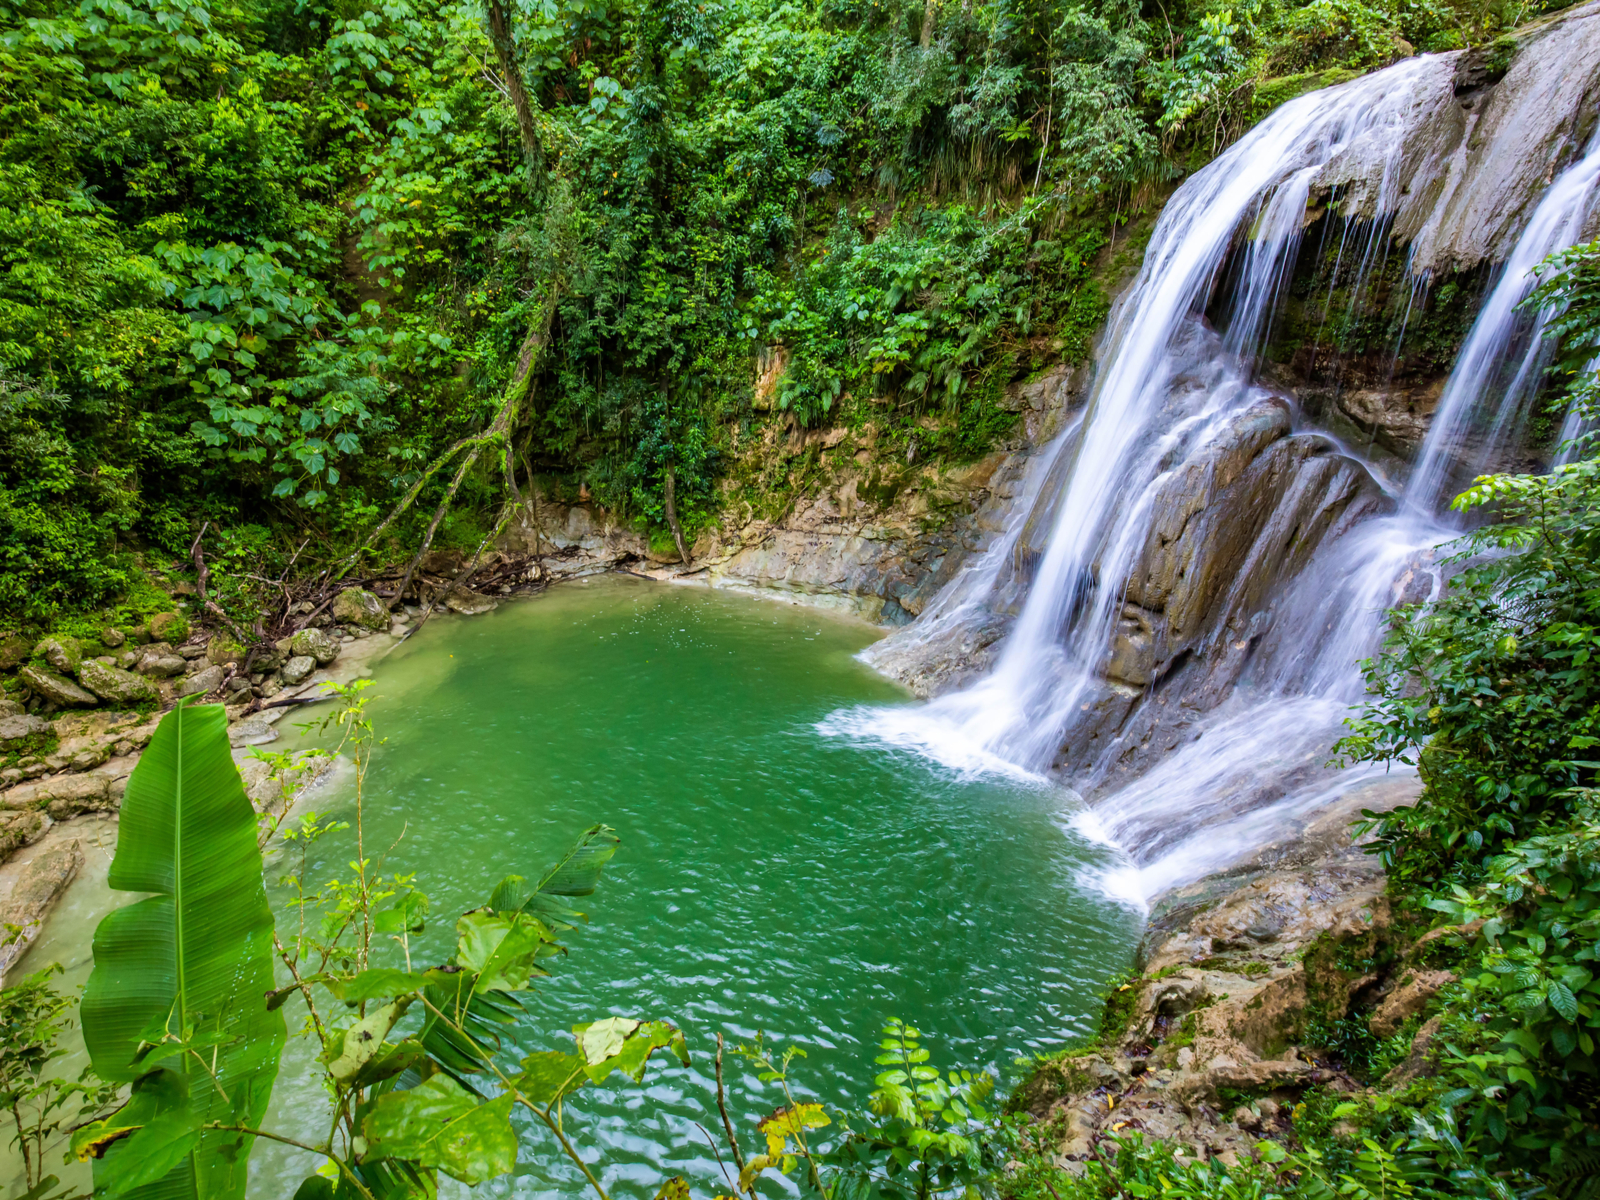 Gozalandia Waterfall pictured during the cheapest time to visit Puerto Rico